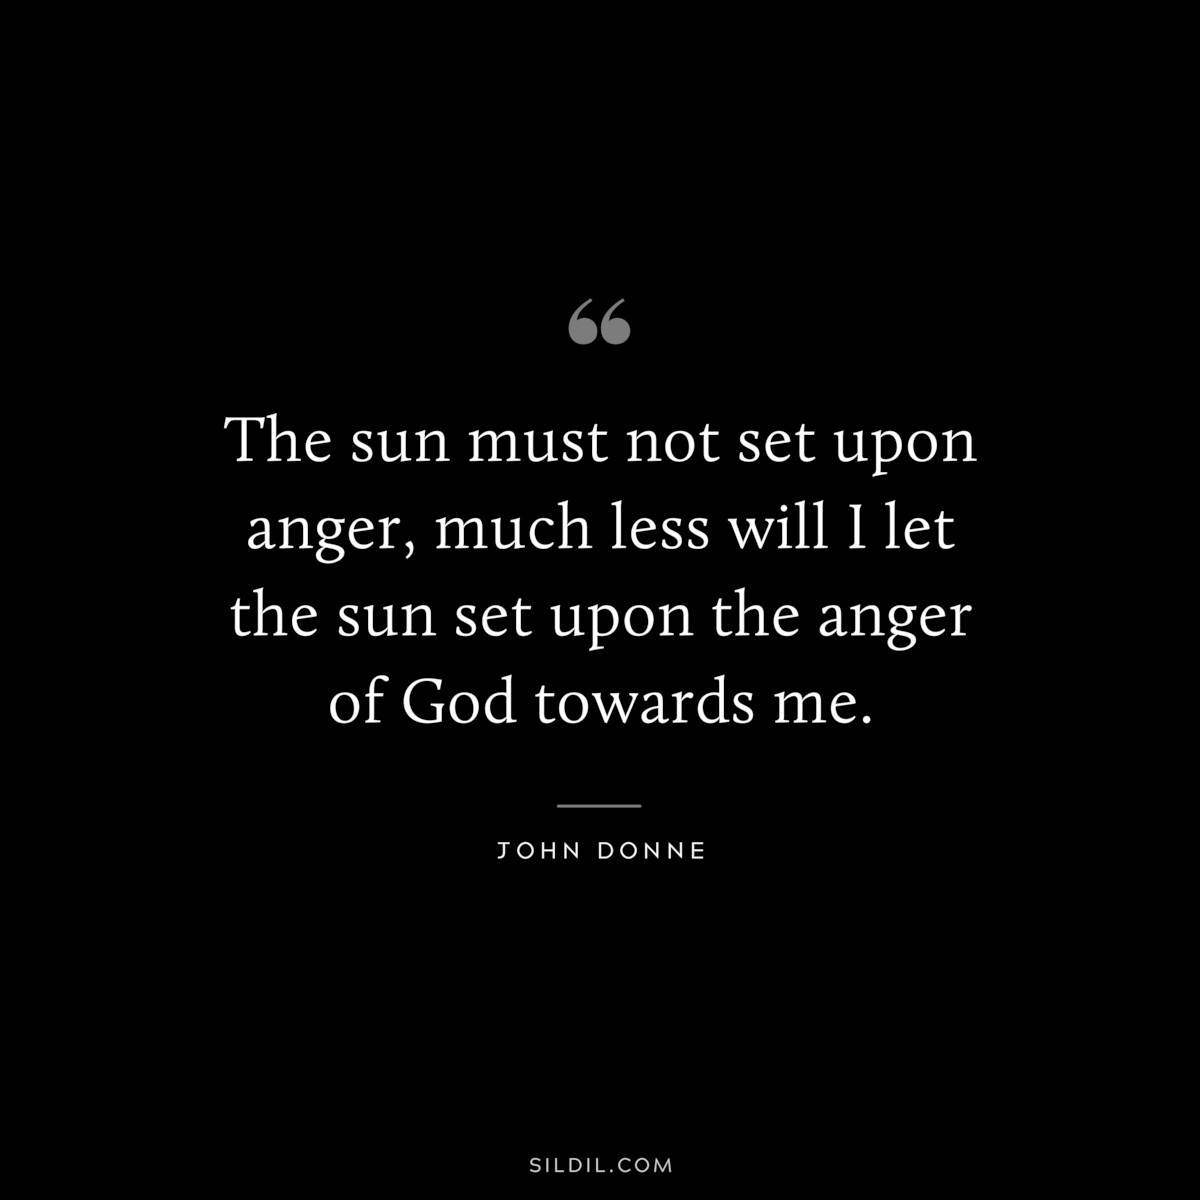 The sun must not set upon anger, much less will I let the sun set upon the anger of God towards me. ― John Donne